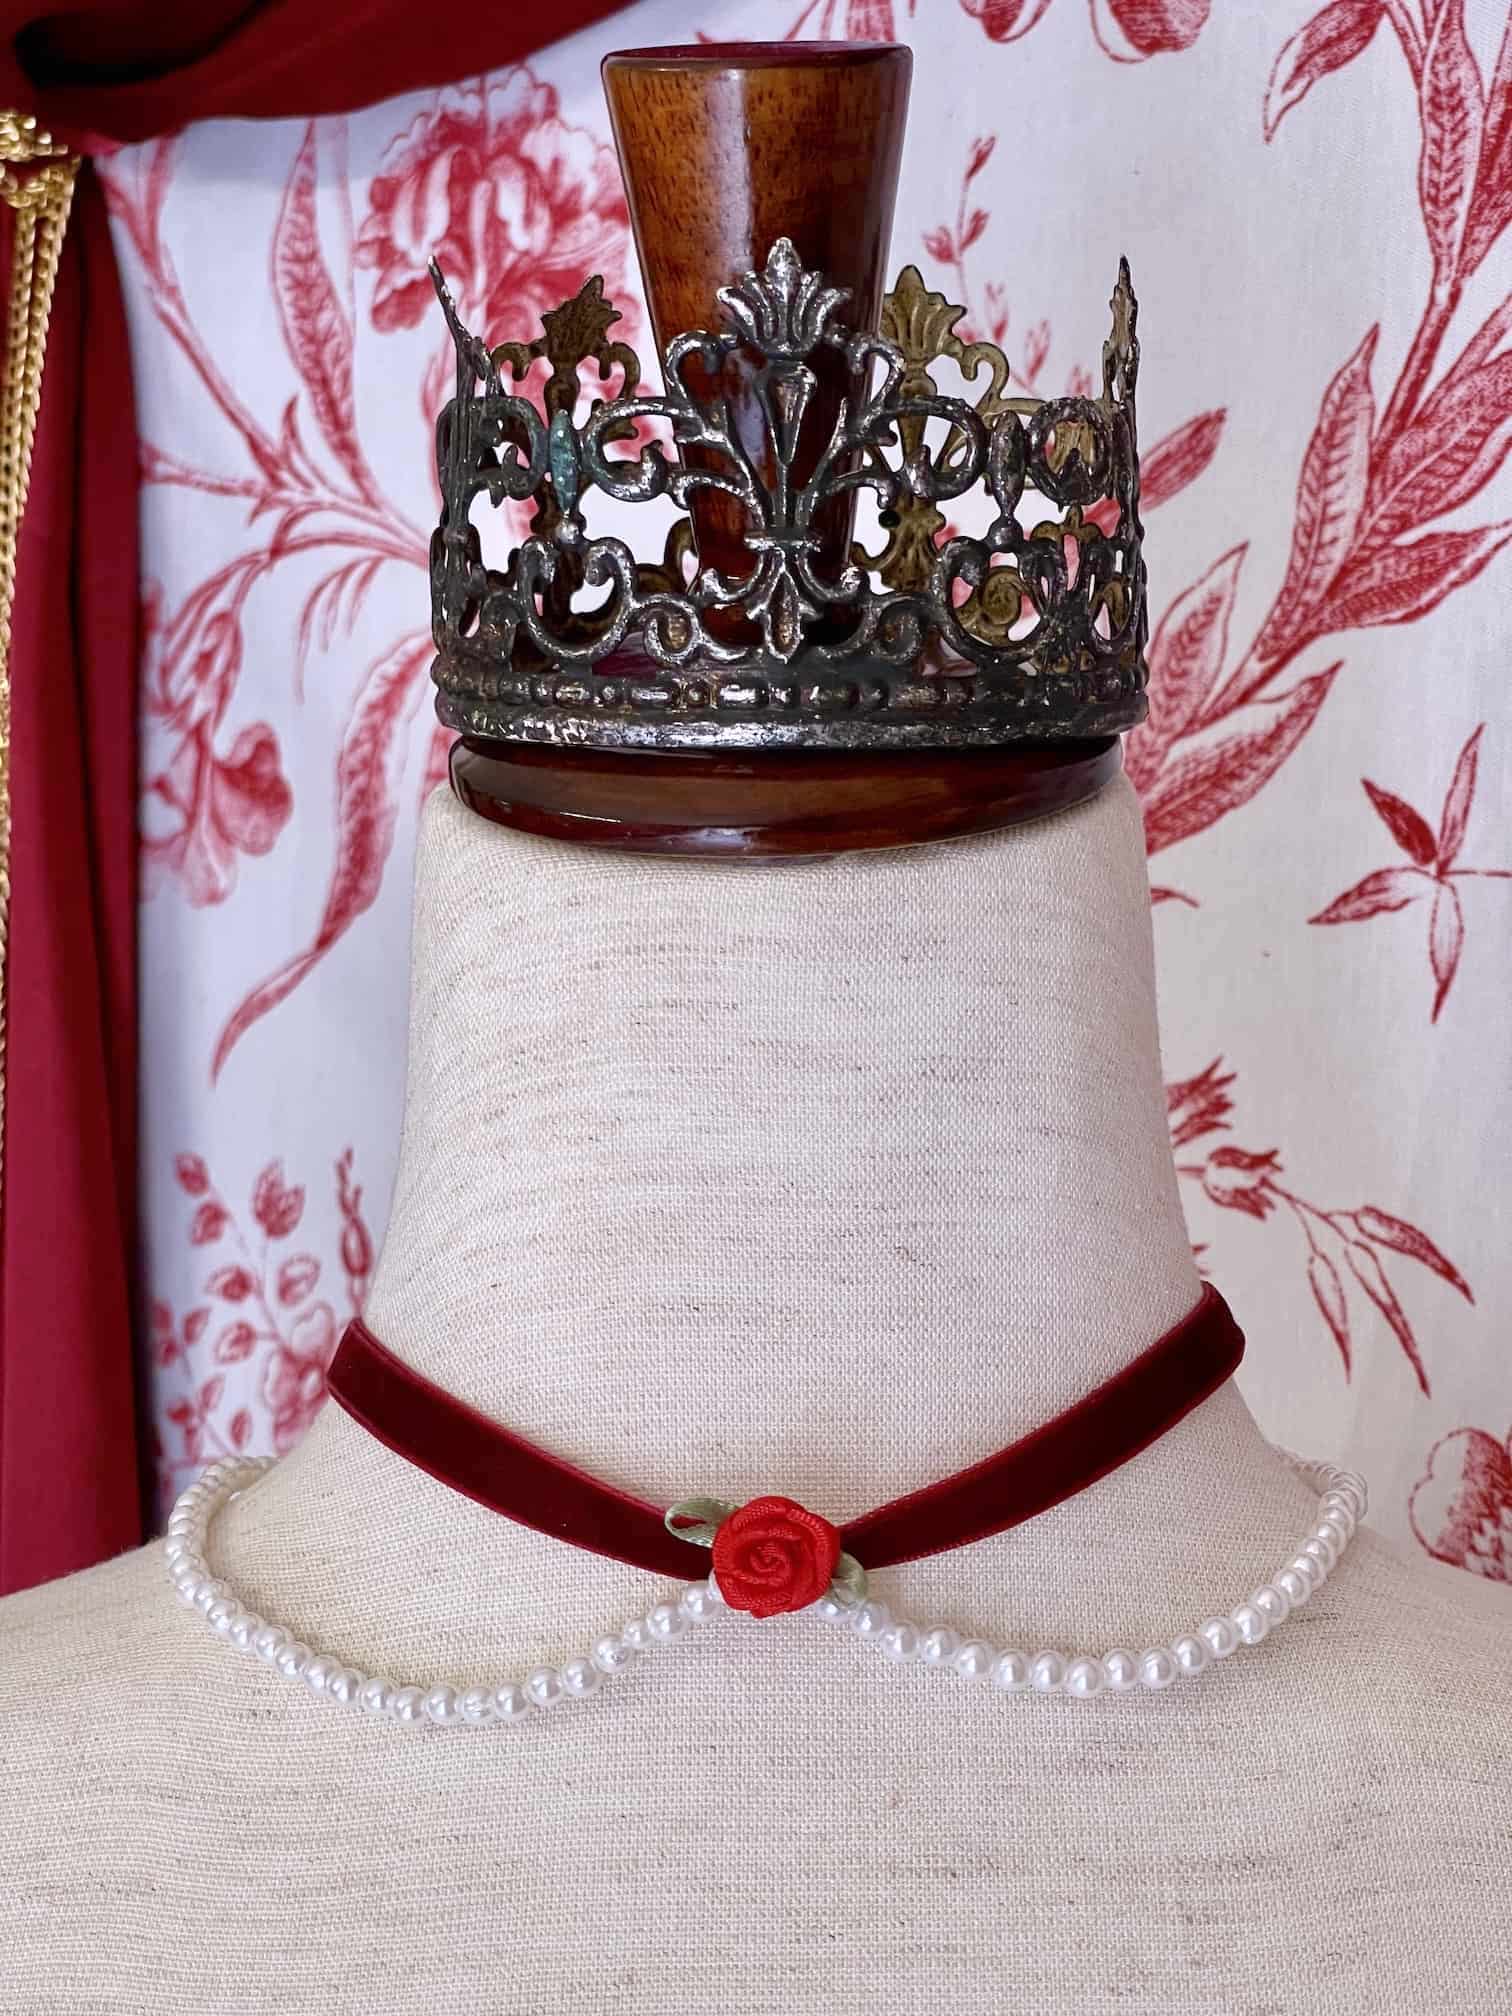 A  Handmade Historically Inspired Velvet Ribbon Pearl Choker Necklace in Burgundy, fit for Renaissance, Baroque, Rococo, Regency, Victorian, or Edwardian outfits..